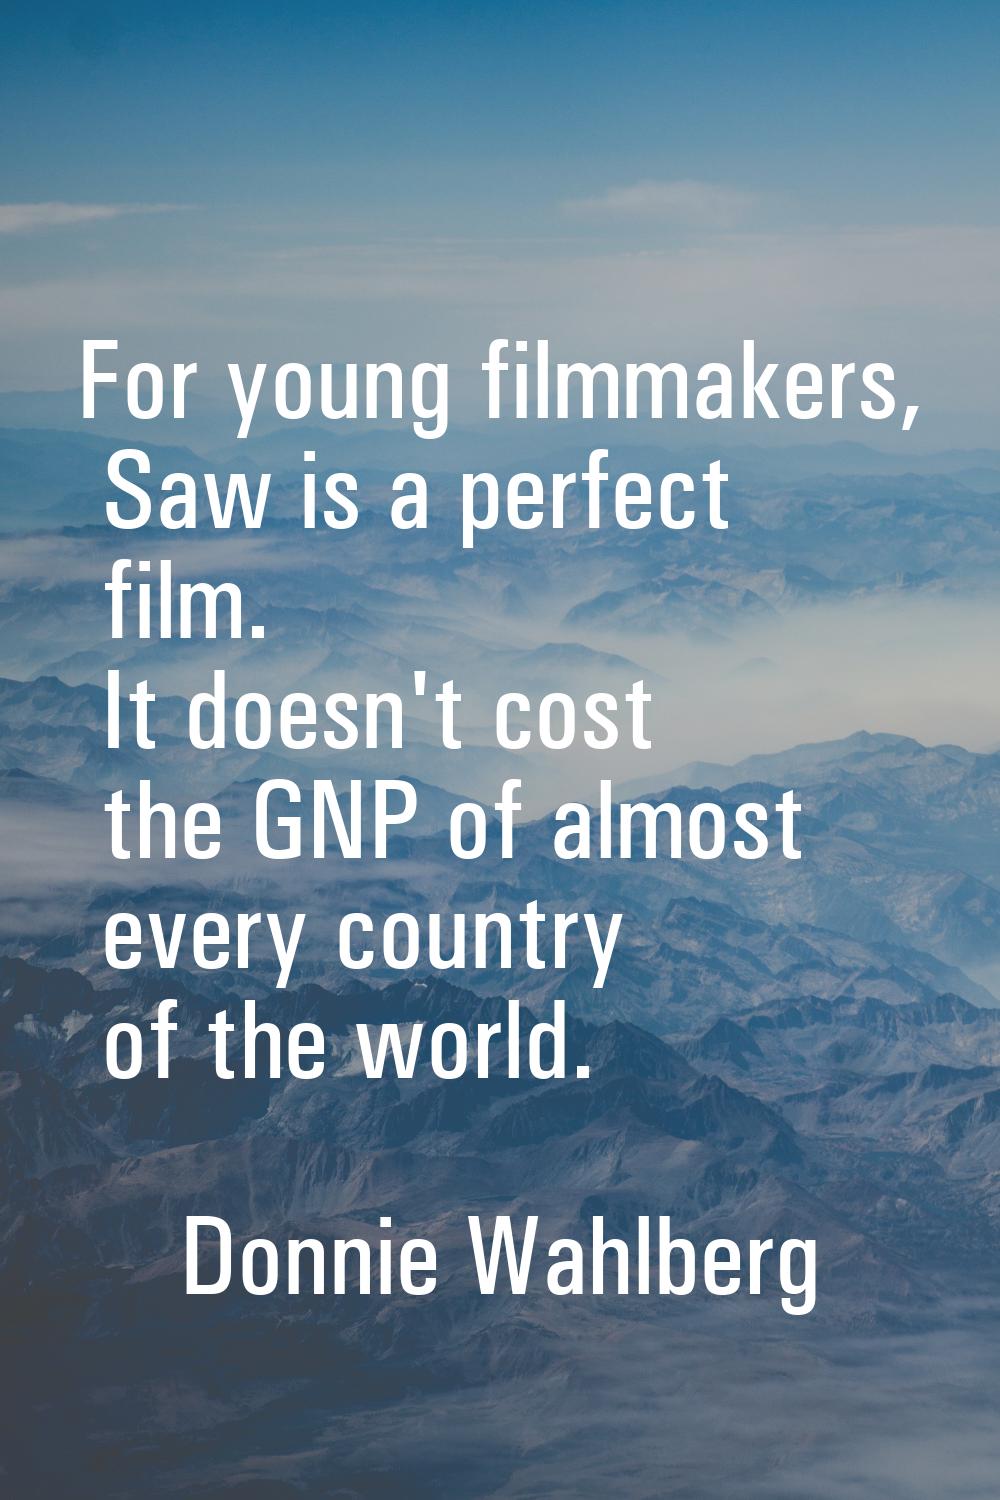 For young filmmakers, Saw is a perfect film. It doesn't cost the GNP of almost every country of the